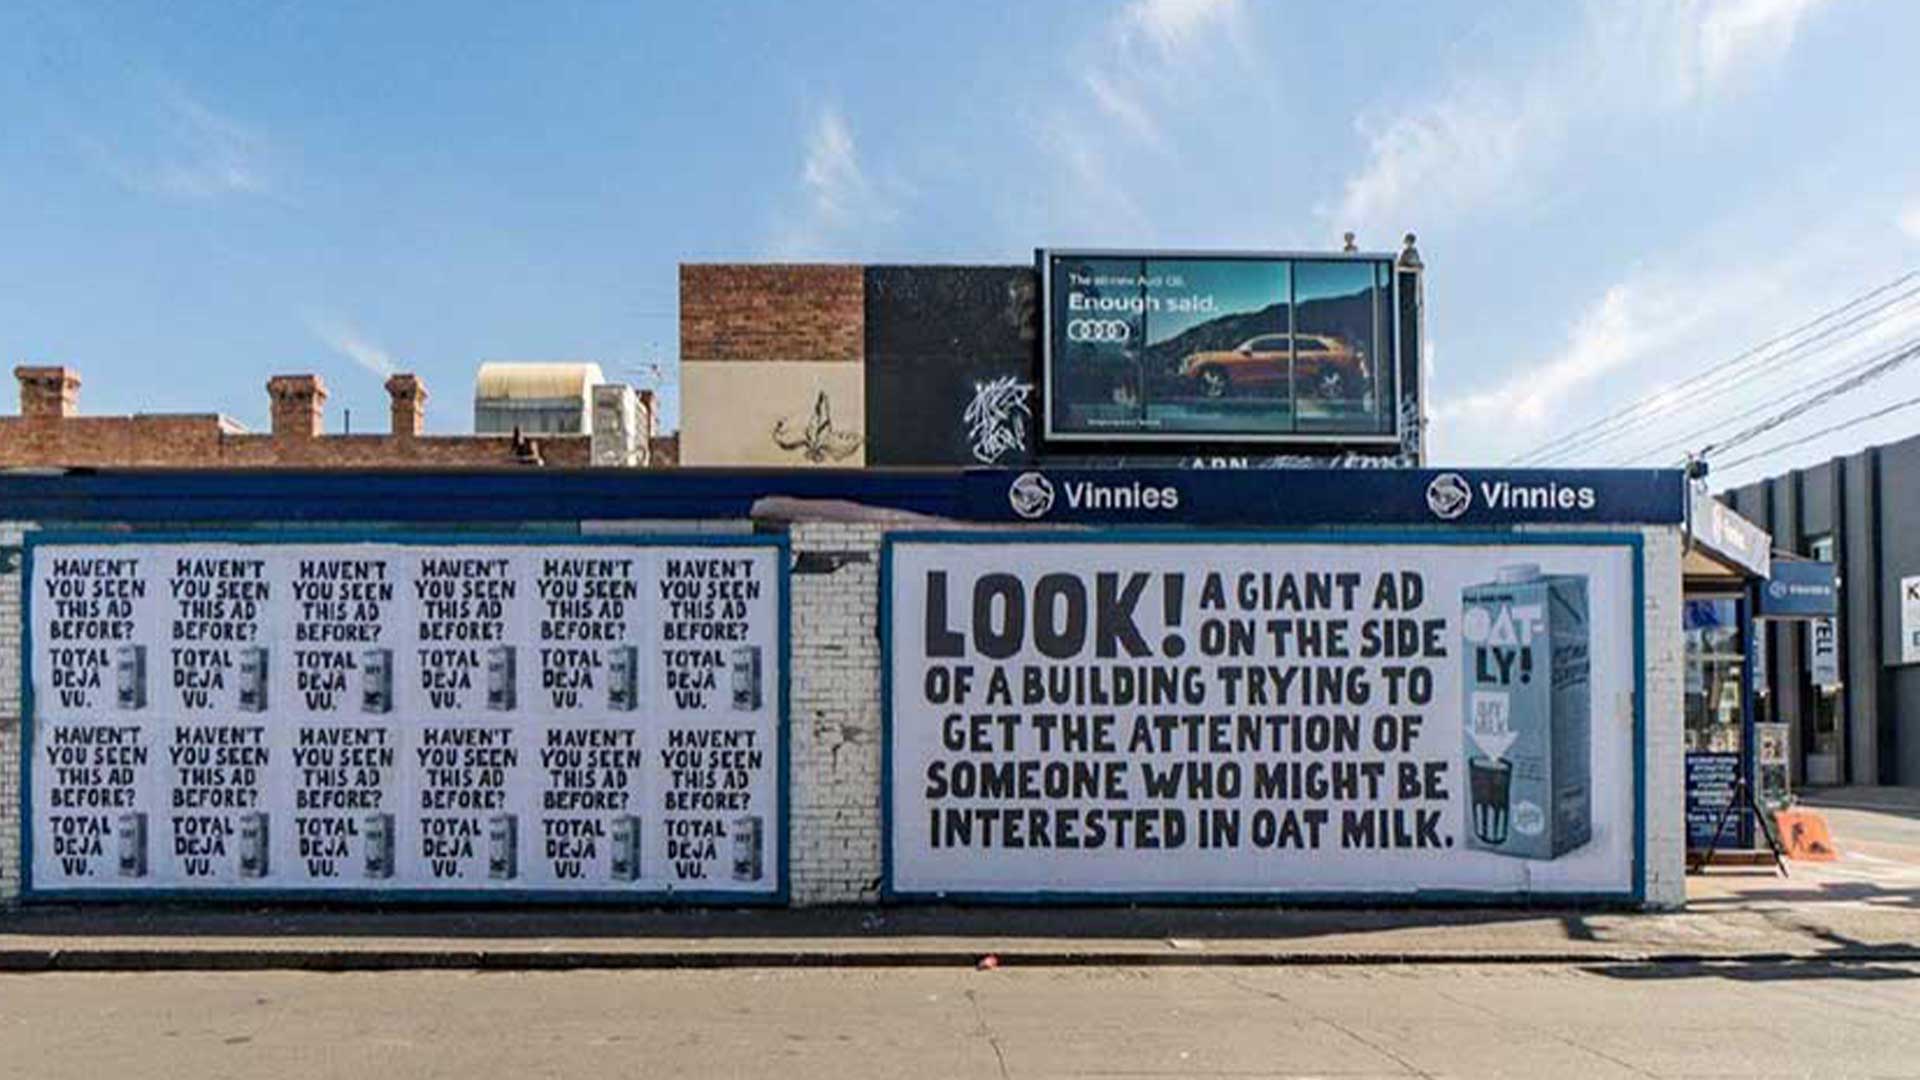 advertising on the side of a building